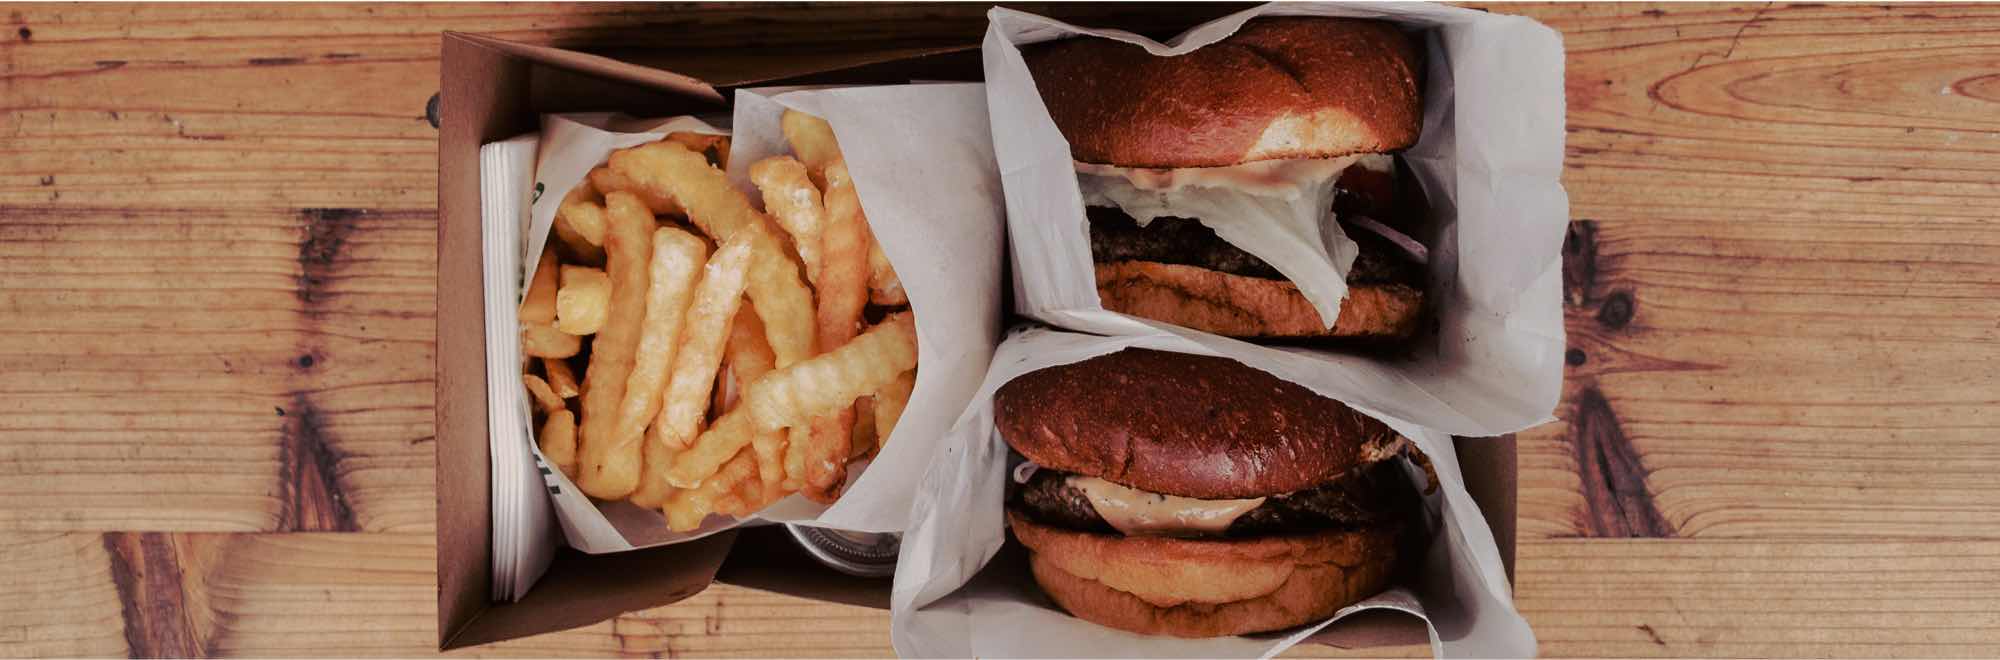 Burger and chips are packaged in a box